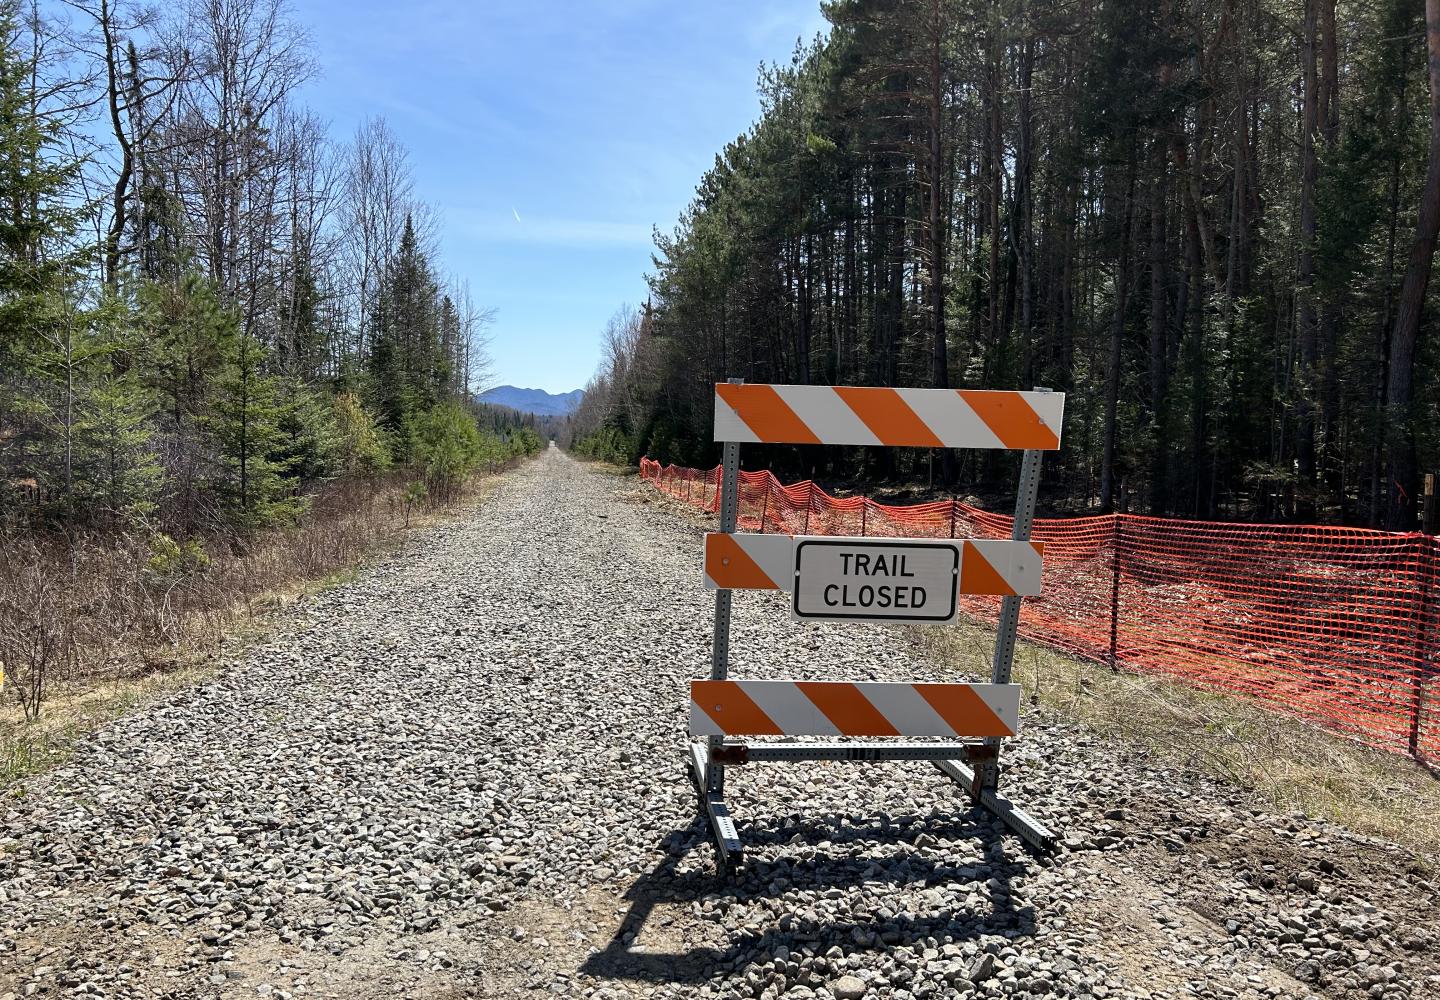 Phase 1 & 2 of the Adirondack Rail Trail are now under construction.